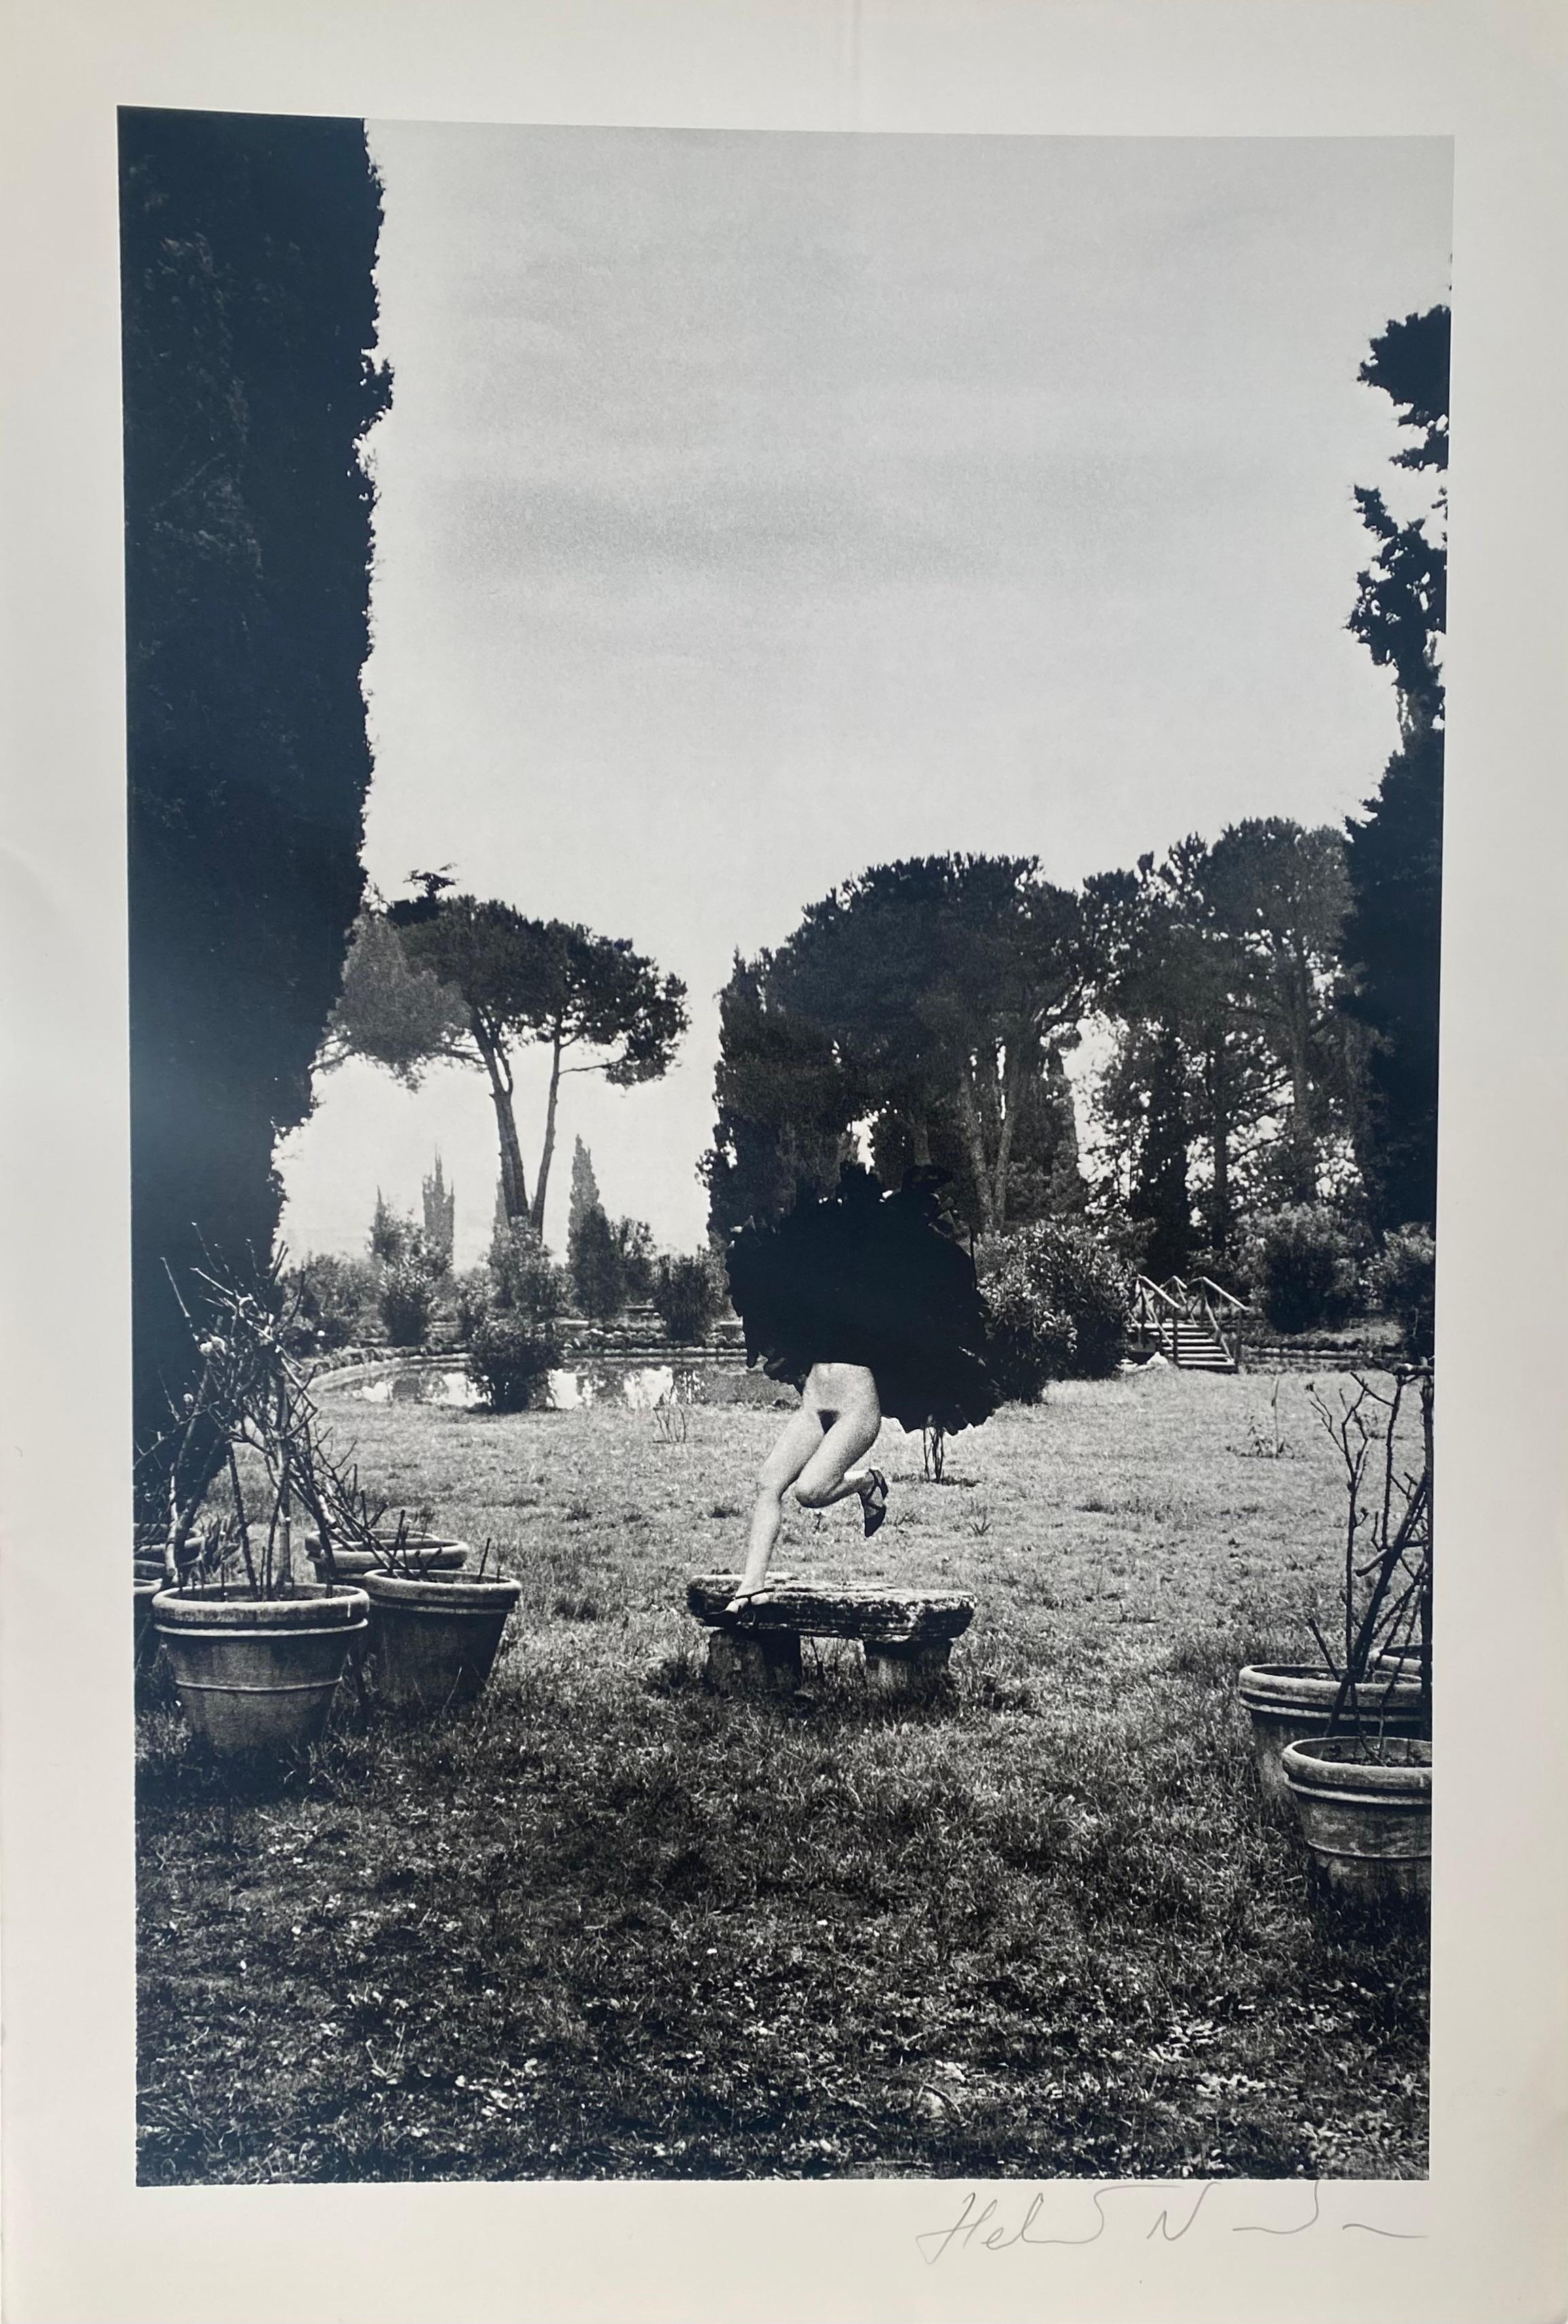 Helmut Newton - In a garden near Rome 1977
Very nice photo-lithograph by Helmut Newton
From the rare portfolio of 1980
Titled on the back
Size : 41 x 28 cm
Signed by the artist in pencil
Perfect condition 
Price : 890€ for the book.